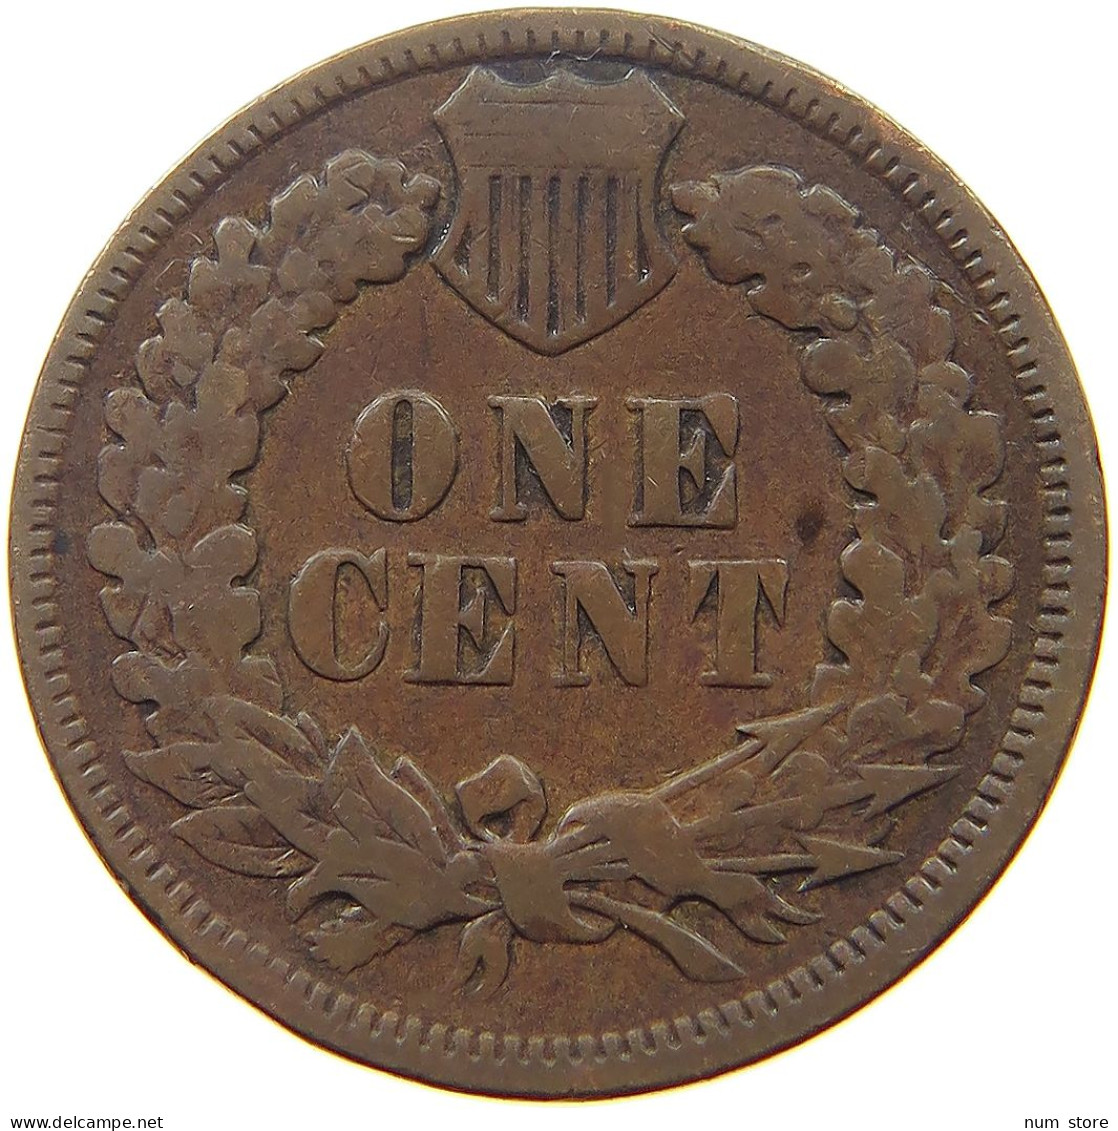 UNITED STATES OF AMERICA CENT 1893 INDIAN HEAD #s051 0859 - 1859-1909: Indian Head